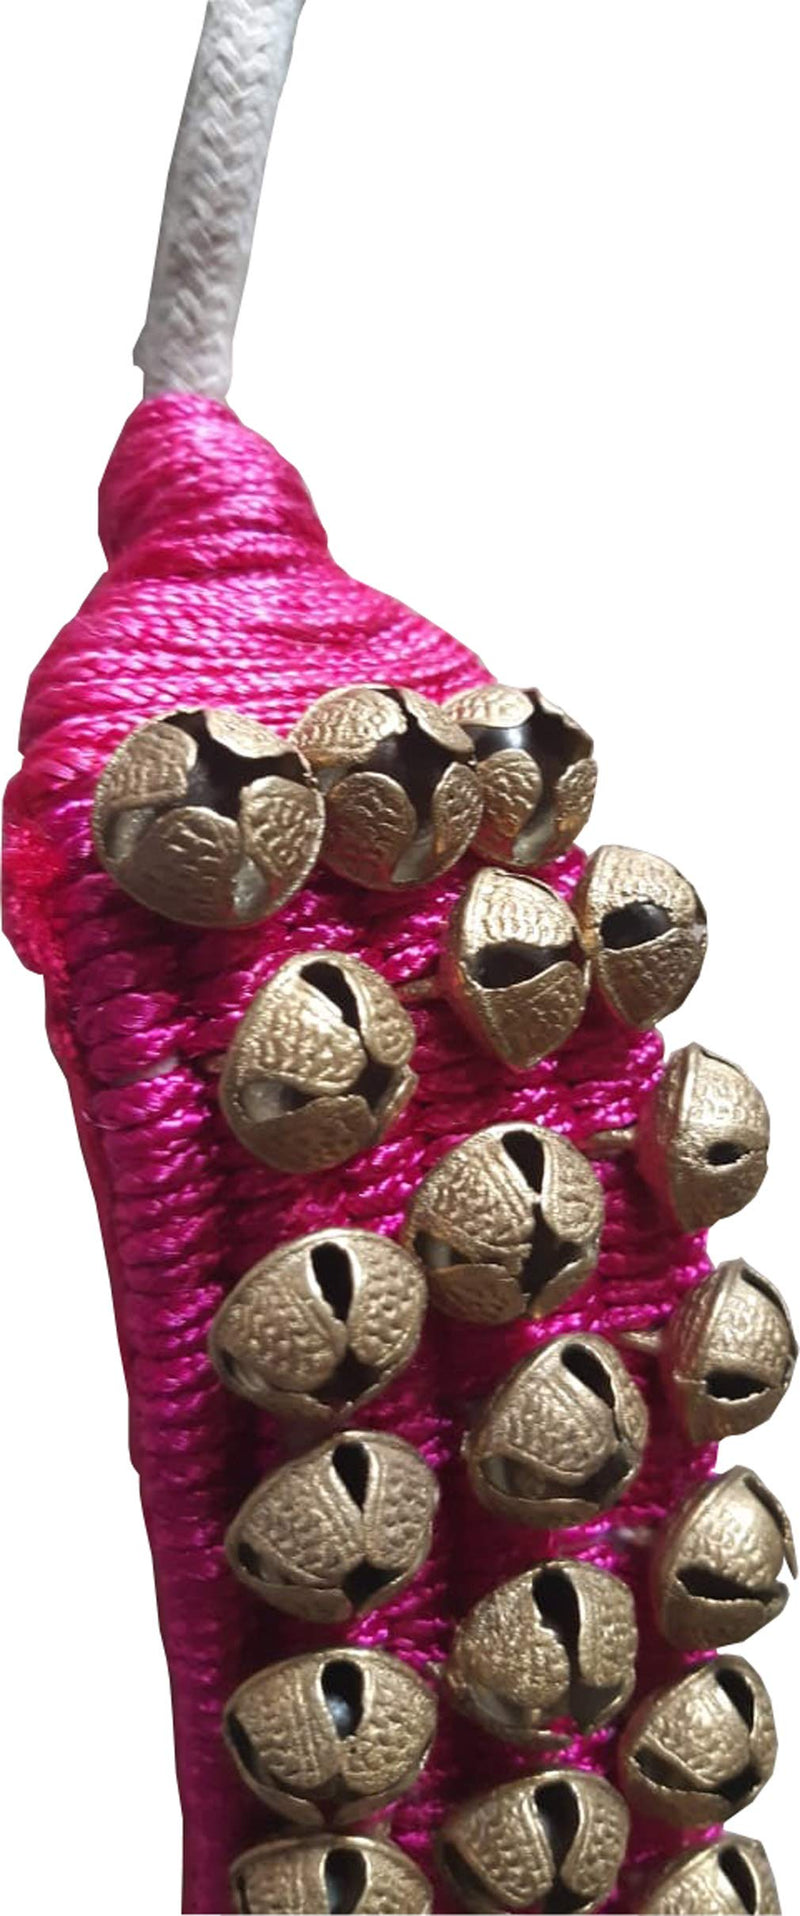 KVR Kathak Bharatnatayam indian traditional dance anklets brass bells ghungroo pair tied over velvet pad for comfortable performance (3 row of bell, Fusia) 3 row of bell